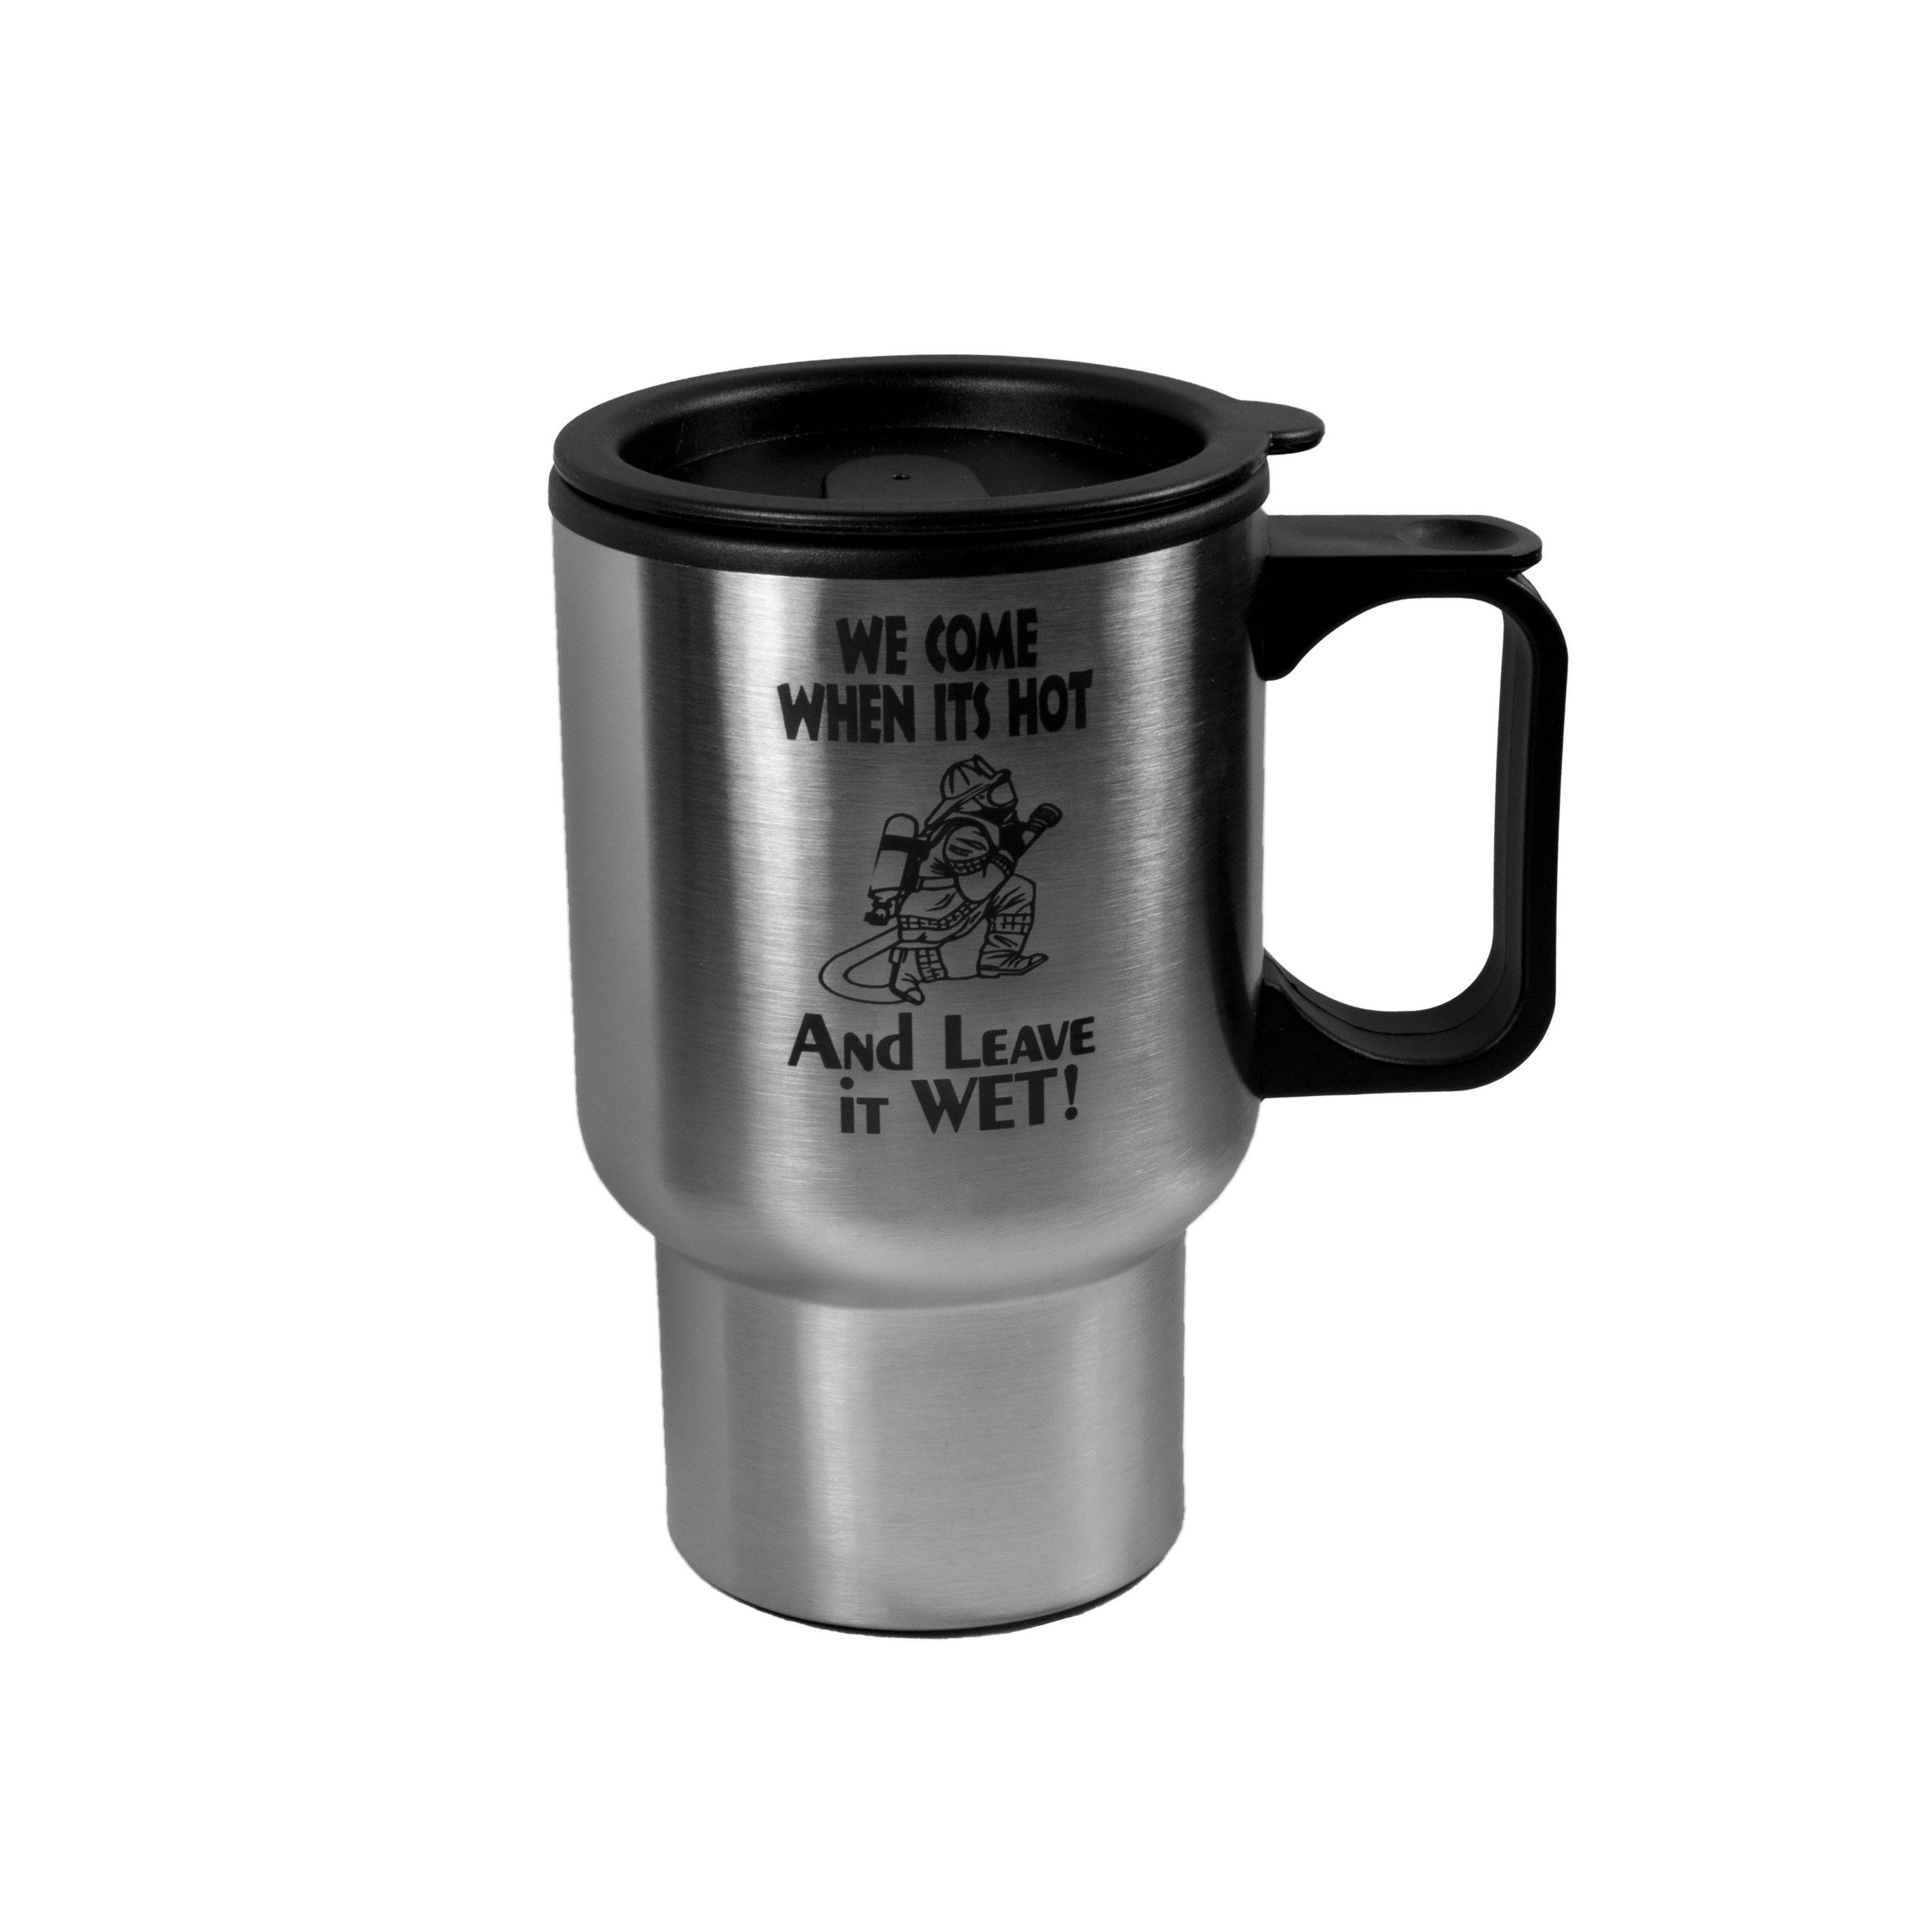 14oz We come when it's hot and leave it wet Stainless steel Mug W/Handle L1